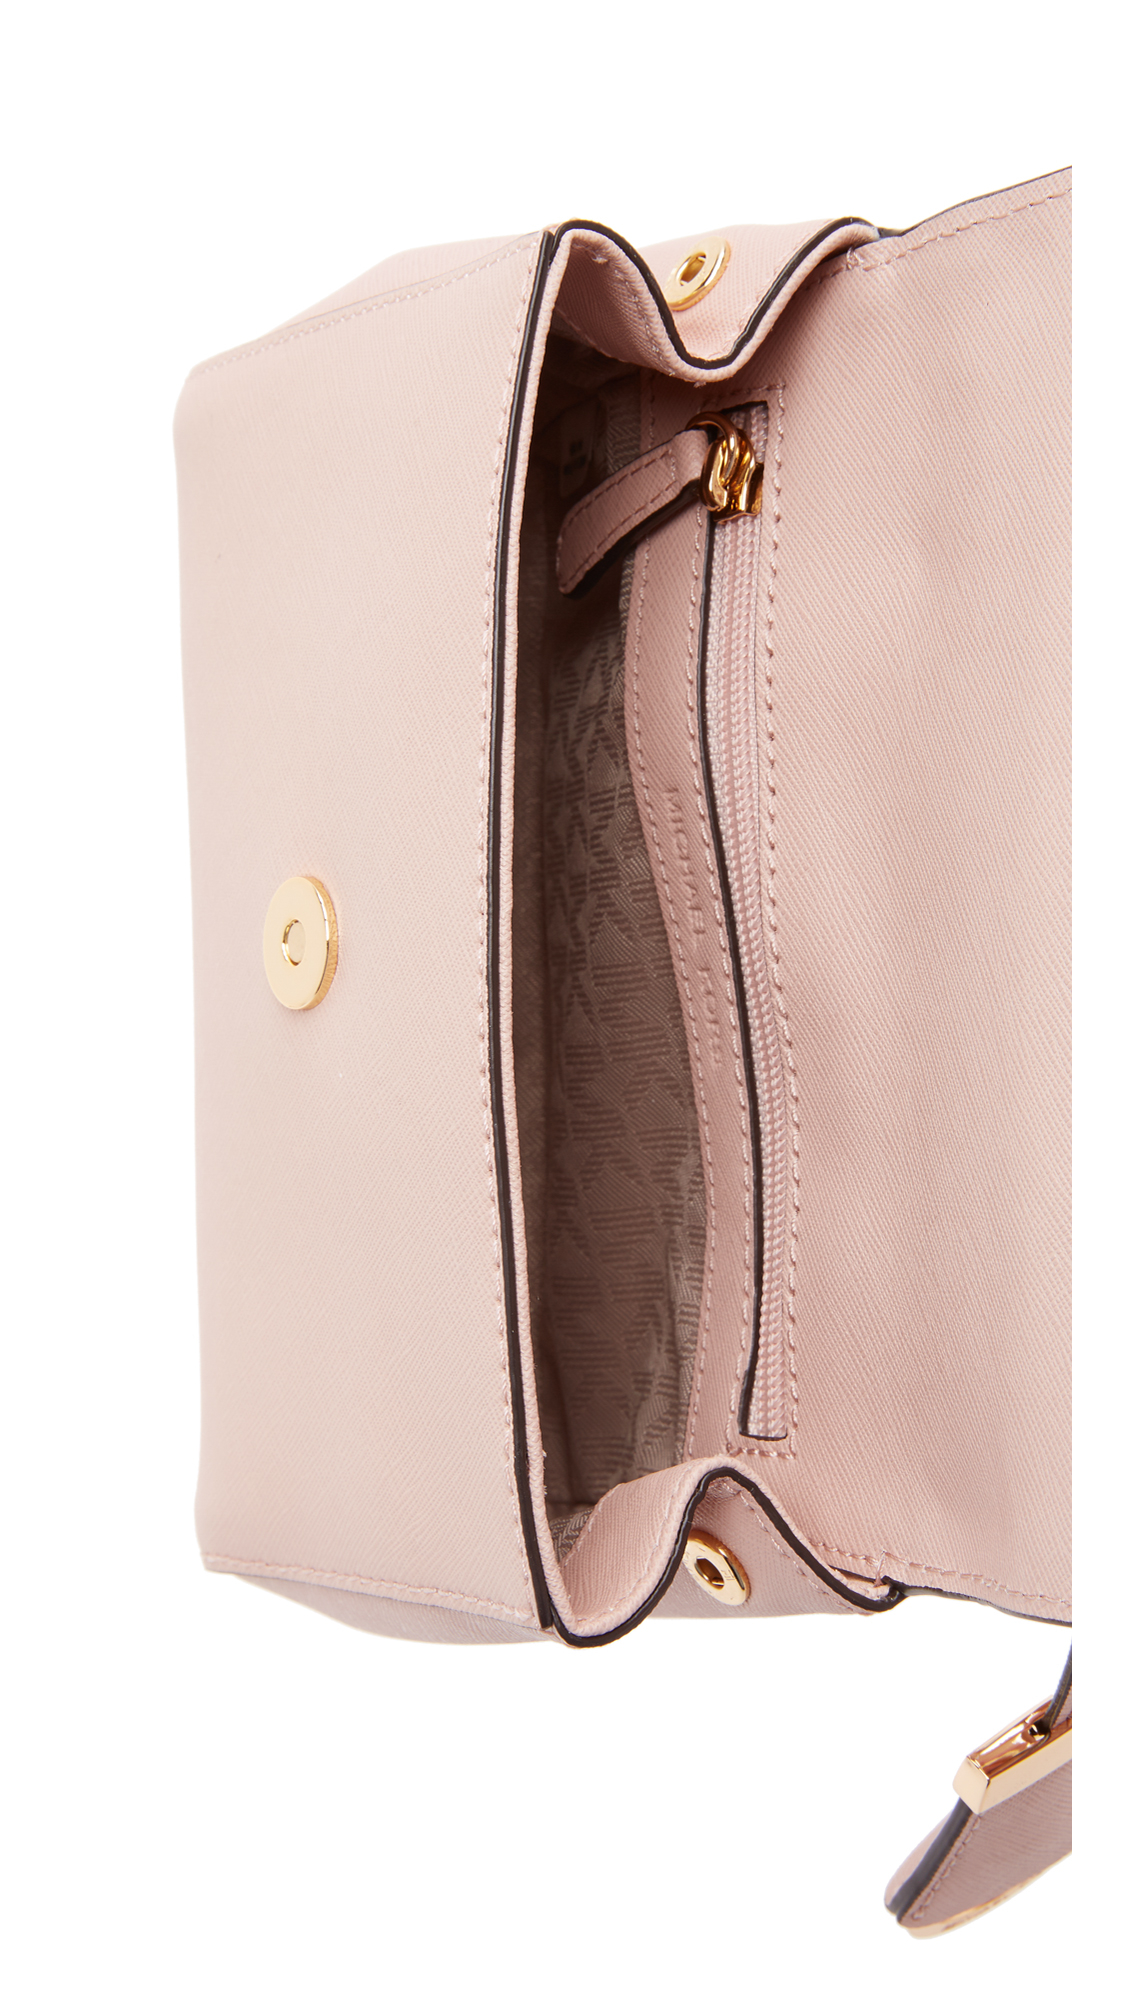 Ava leather crossbody bag Michael Kors Pink in Leather - 31516984